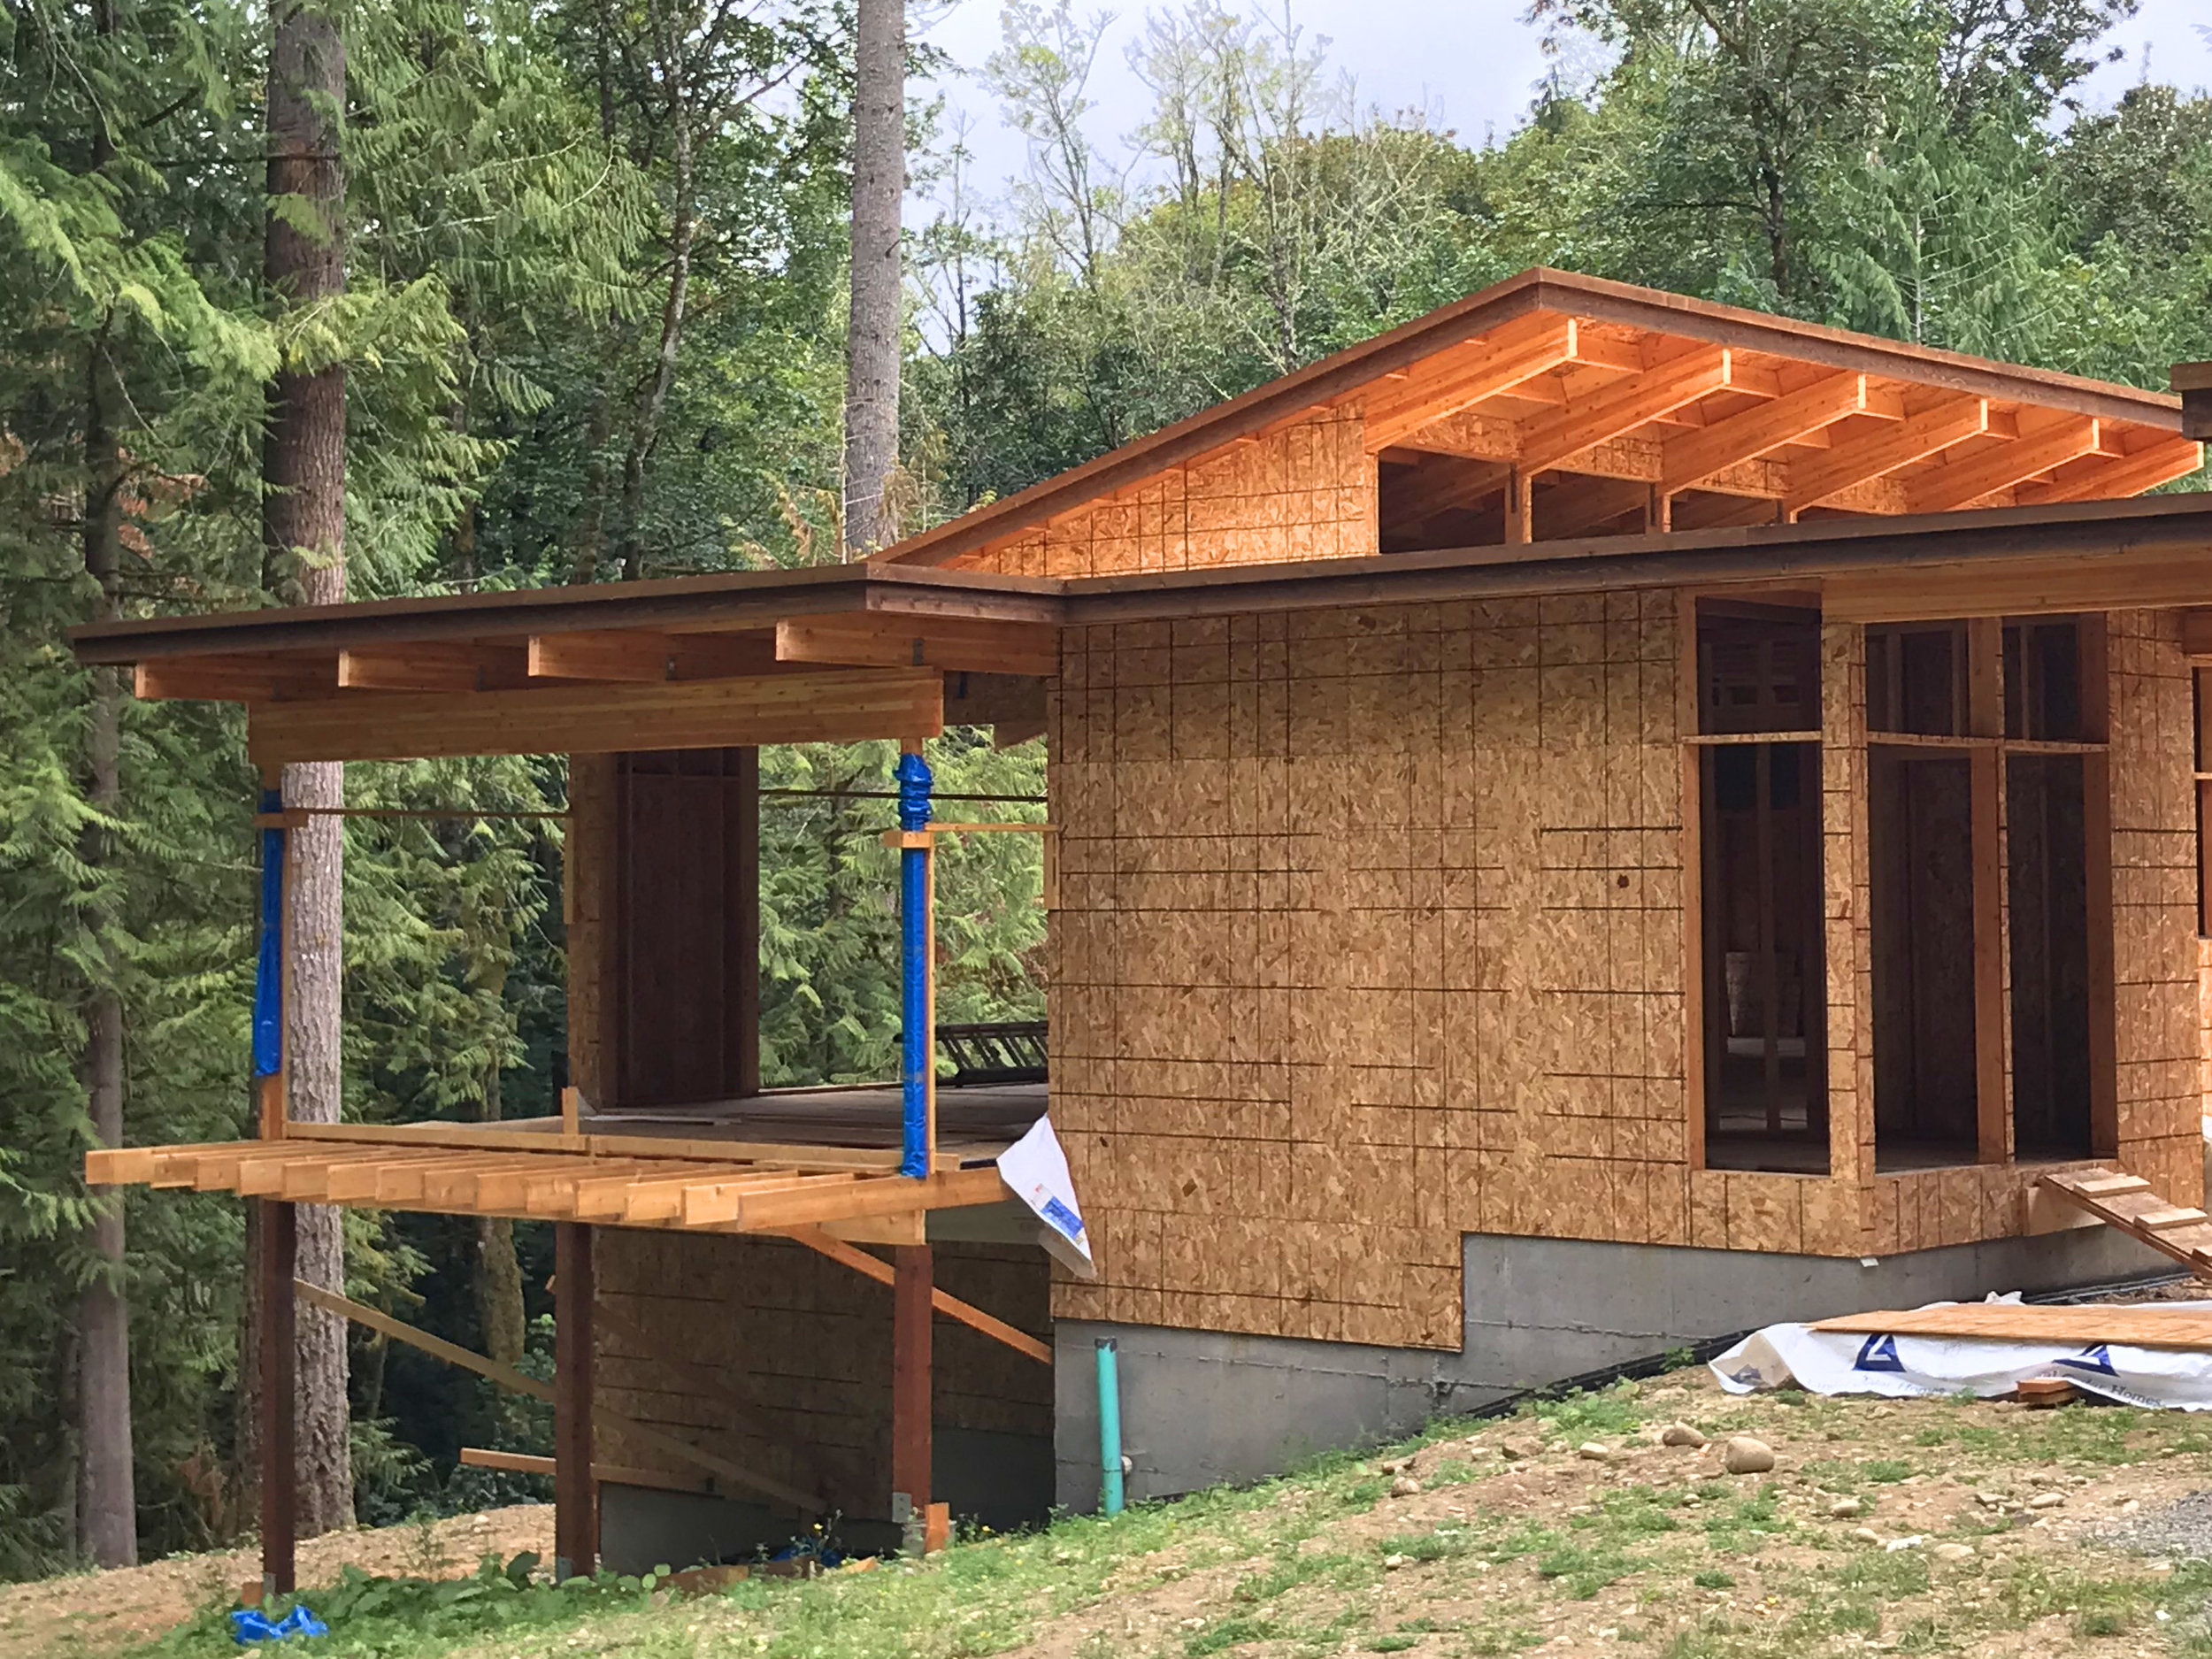   The post and beam system can support deep floor and roof overhangs, here support the dining room and covered deck that “float” up in trees (note the sunlit great room behind).  